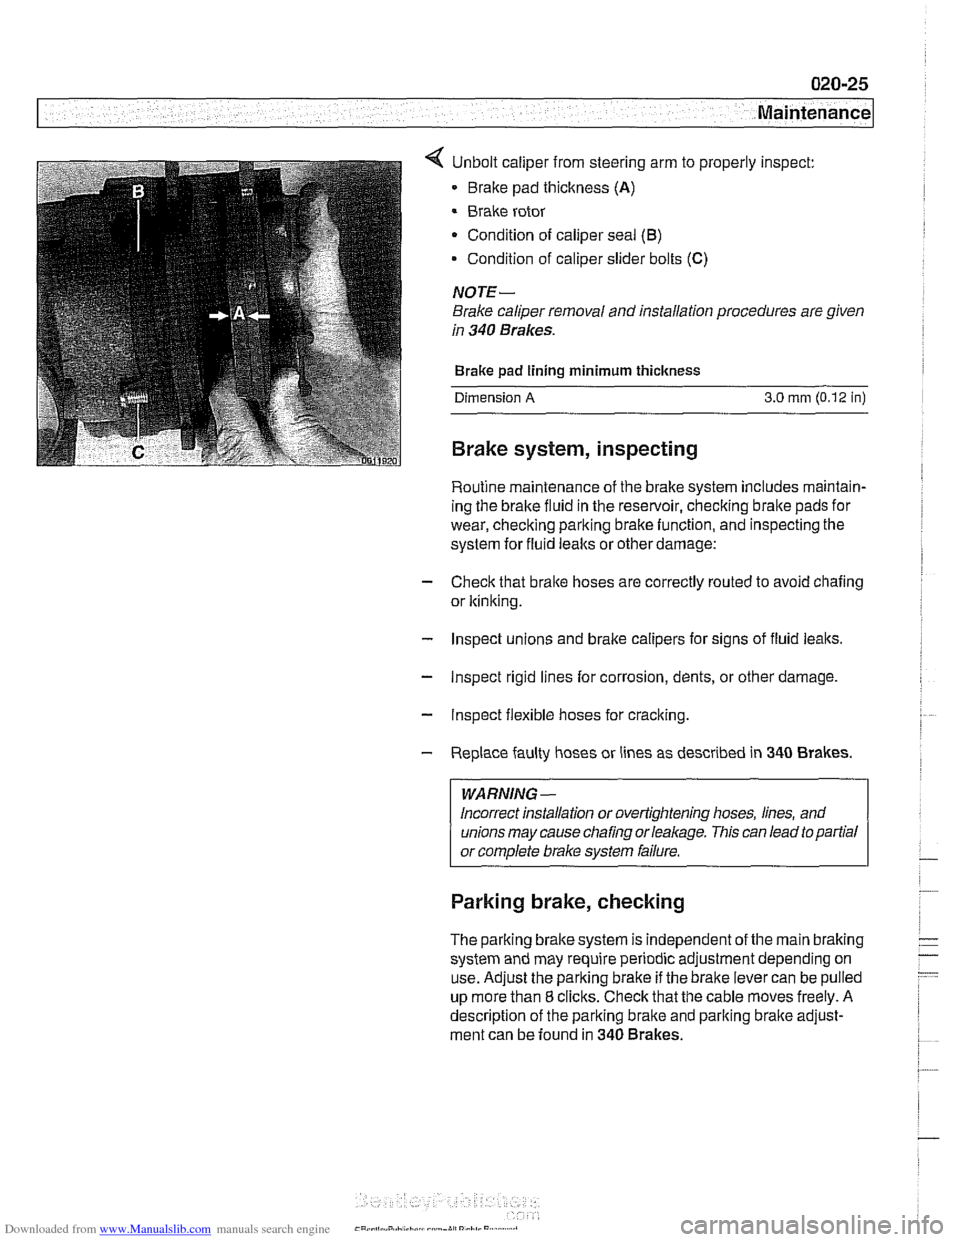 BMW 525i 2001 E39 Workshop Manual Downloaded from www.Manualslib.com manuals search engine 
7 Maintenance 
< Unbolt caliper from steering arm  to properly  inspect: 
Brake  pad thickness 
(A) 
Brake rotor 
Condition  of caliper seal 
